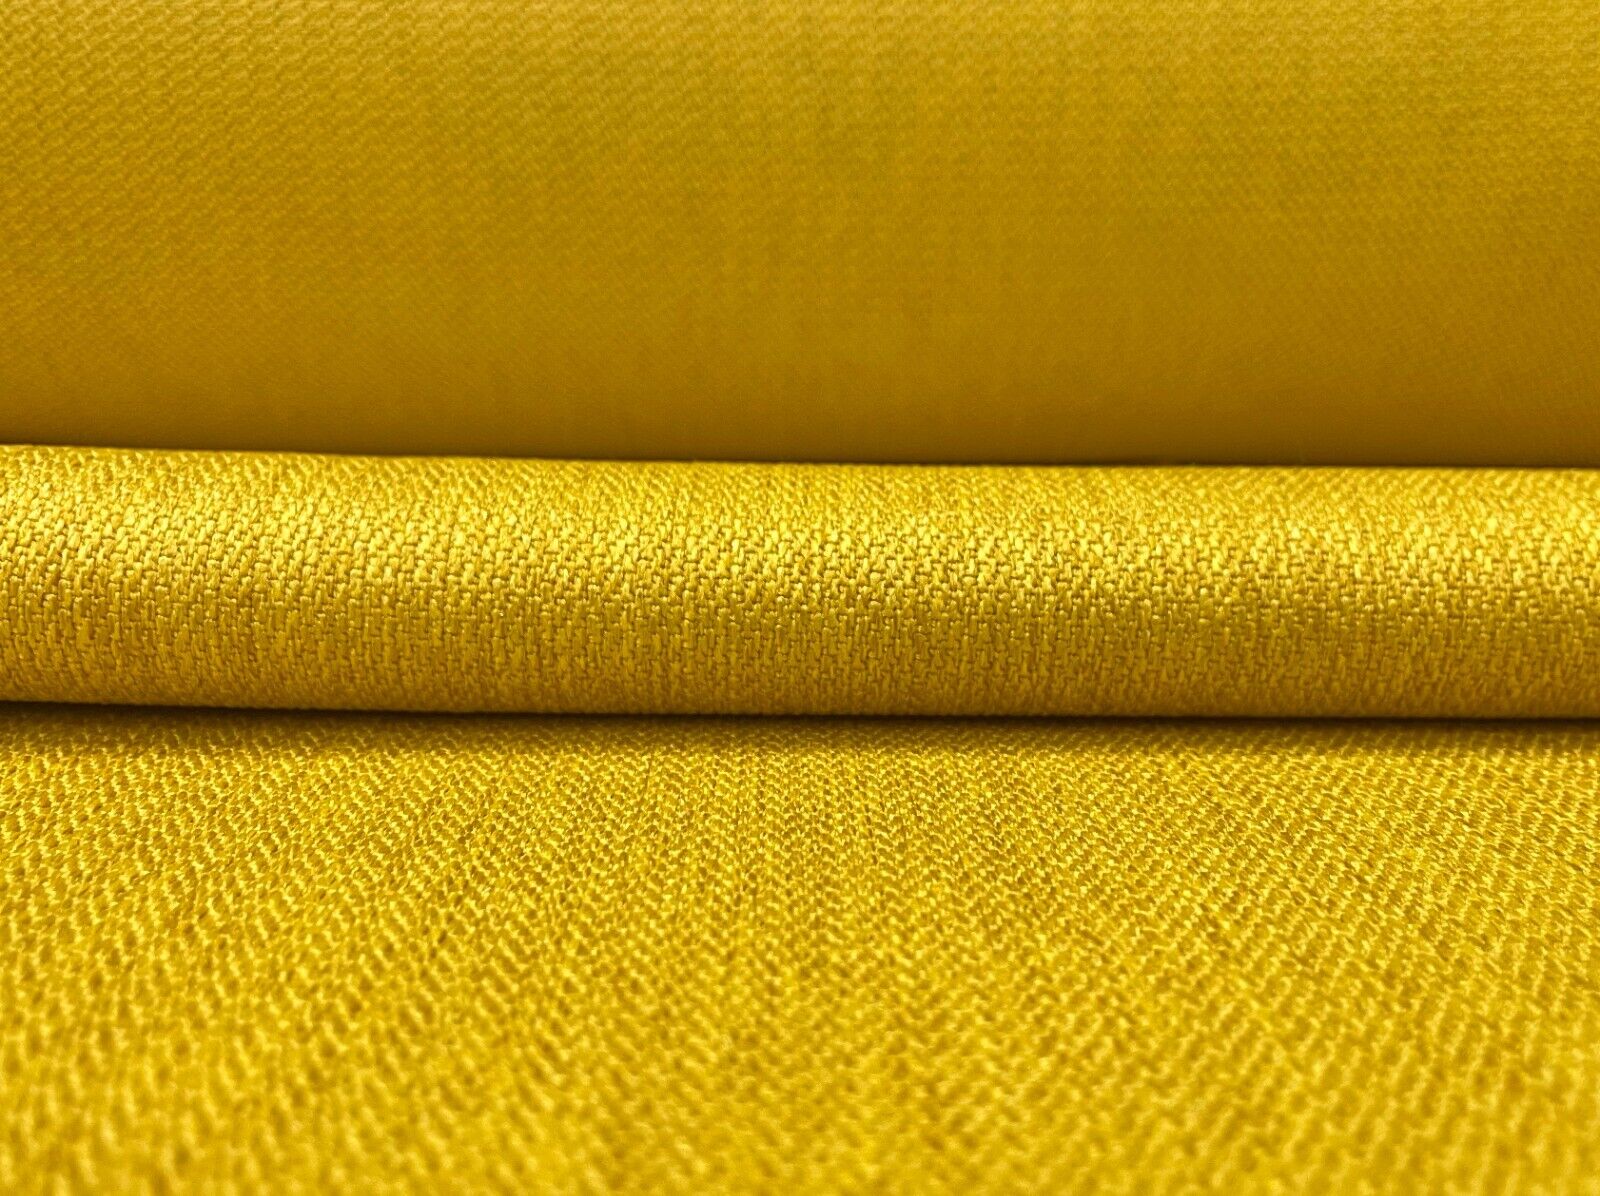 1.25 yds Luum Percept Radiant Yellow Polyester Upholstery Fabric - MSRP $50